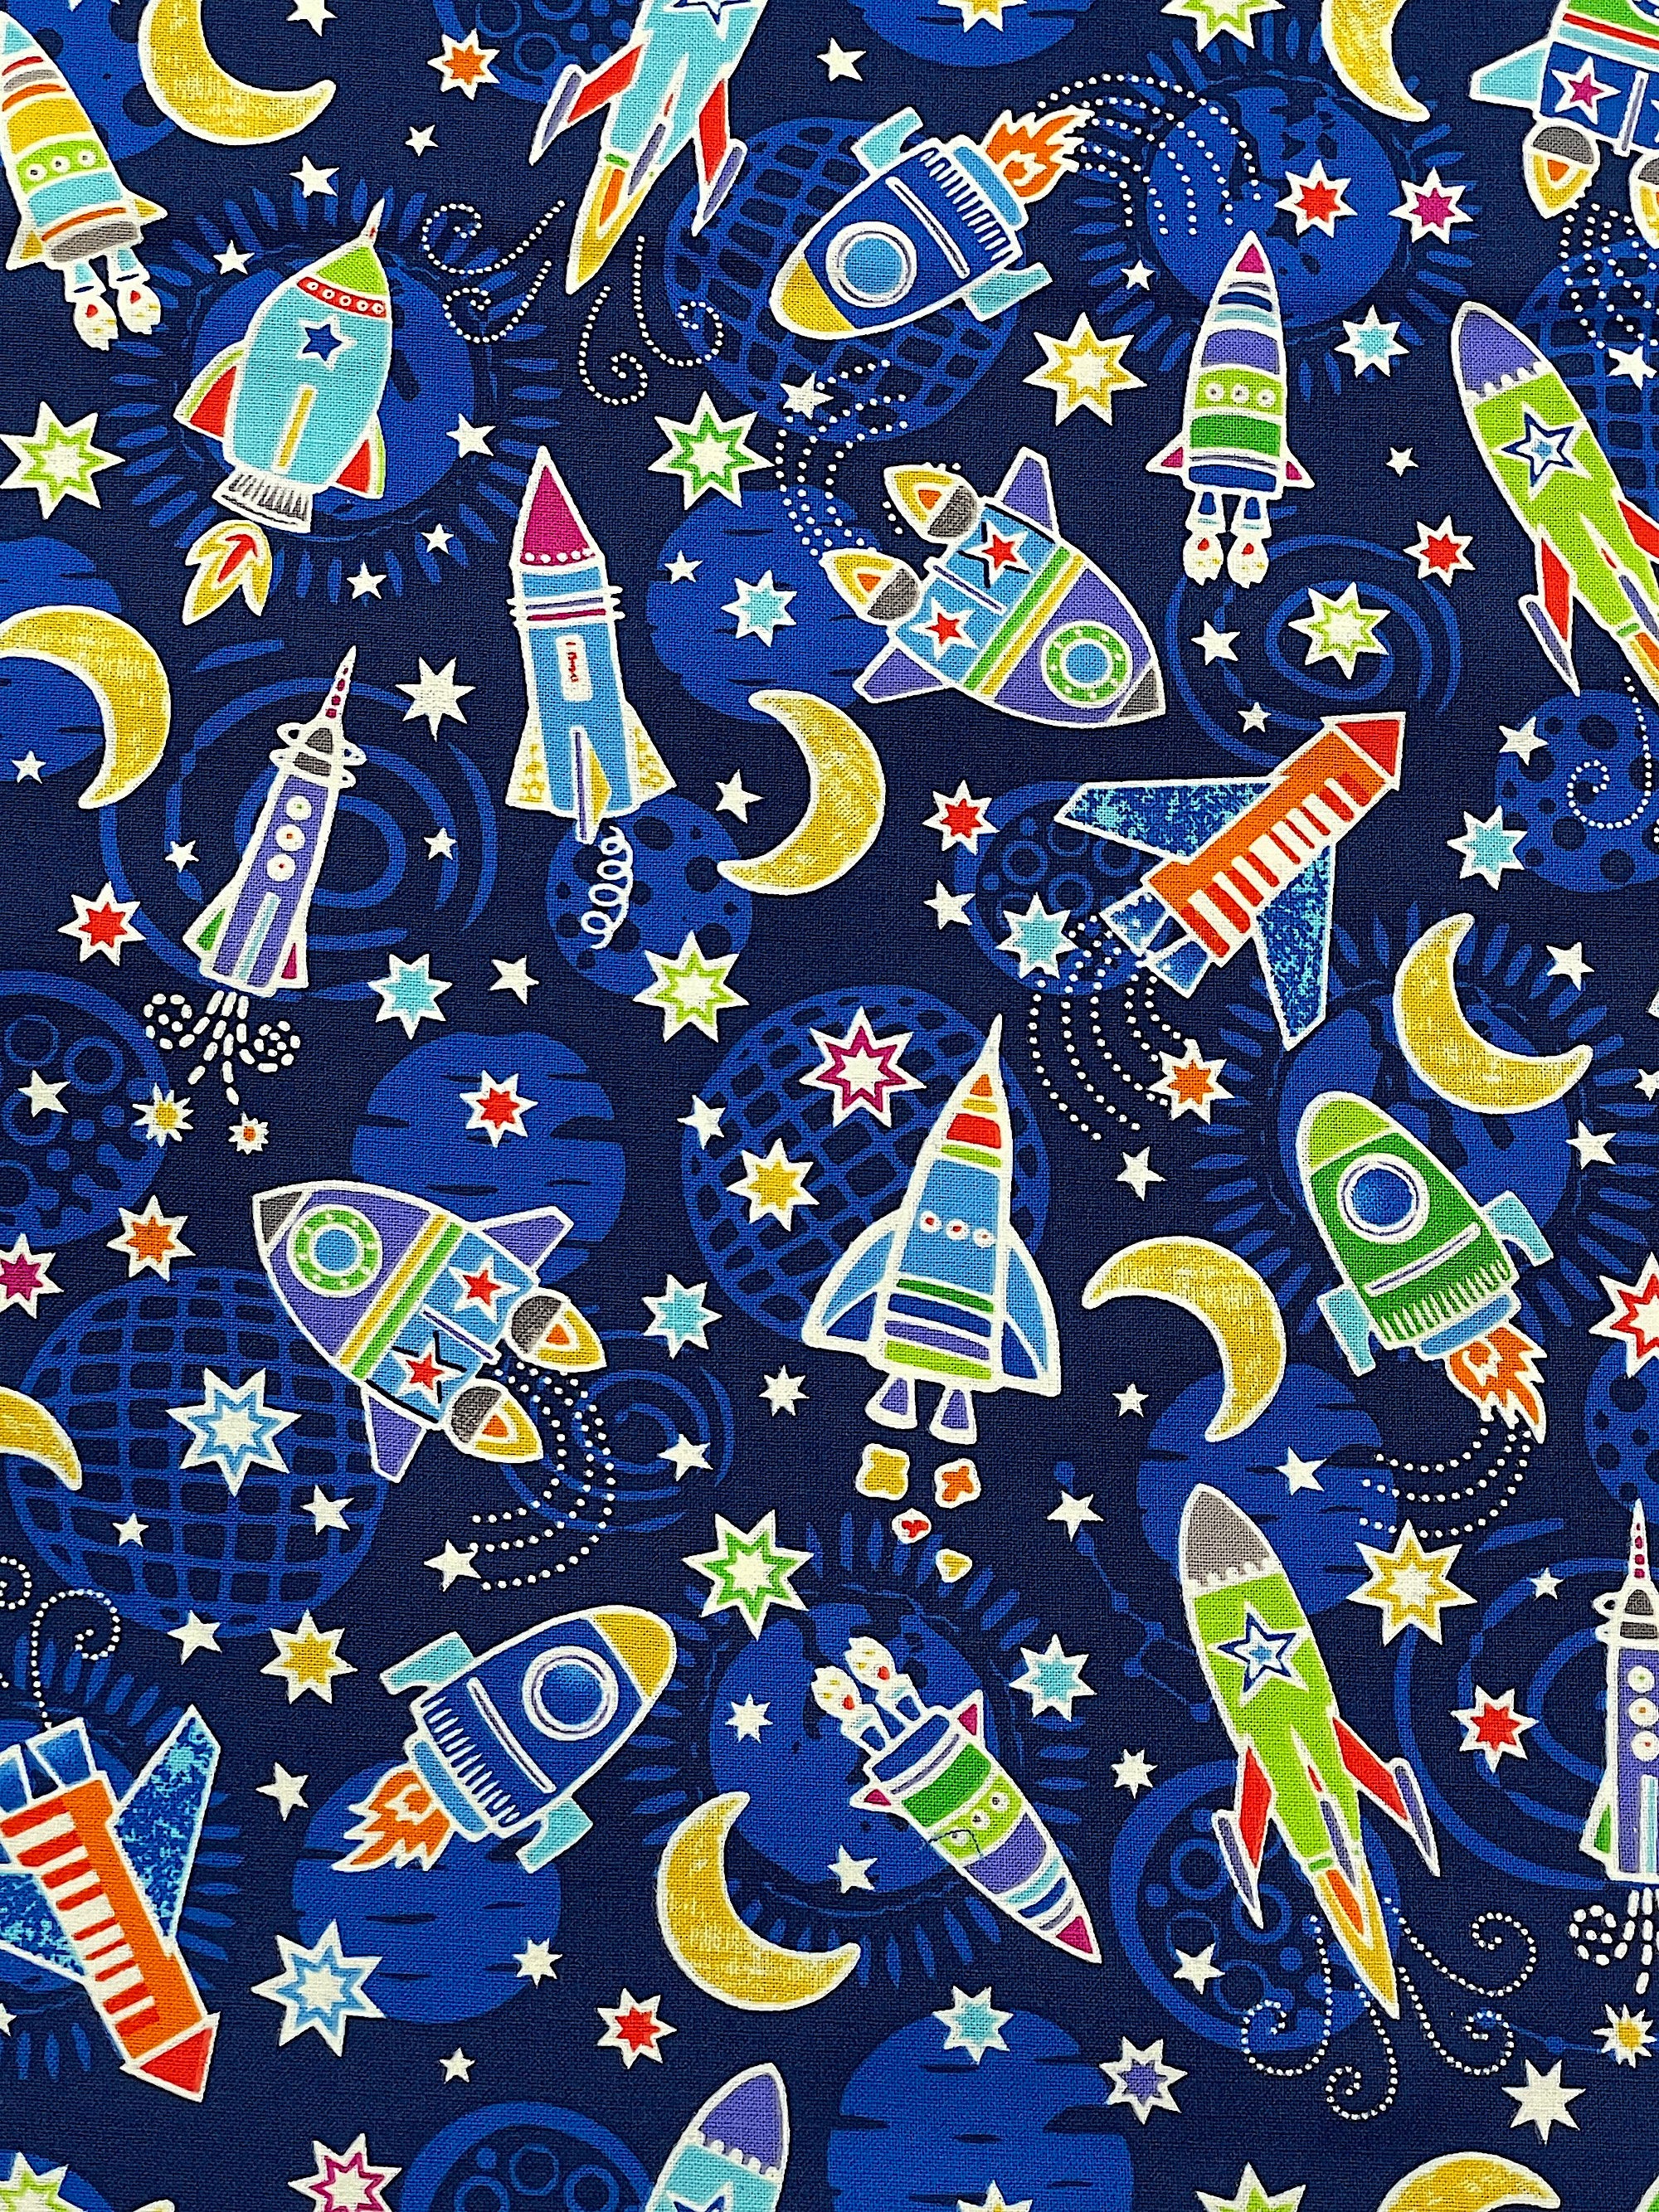 This fabric is part of the Lift Off collection by Kanvas Studio. This blue fabric is covered with space rockets and stars.